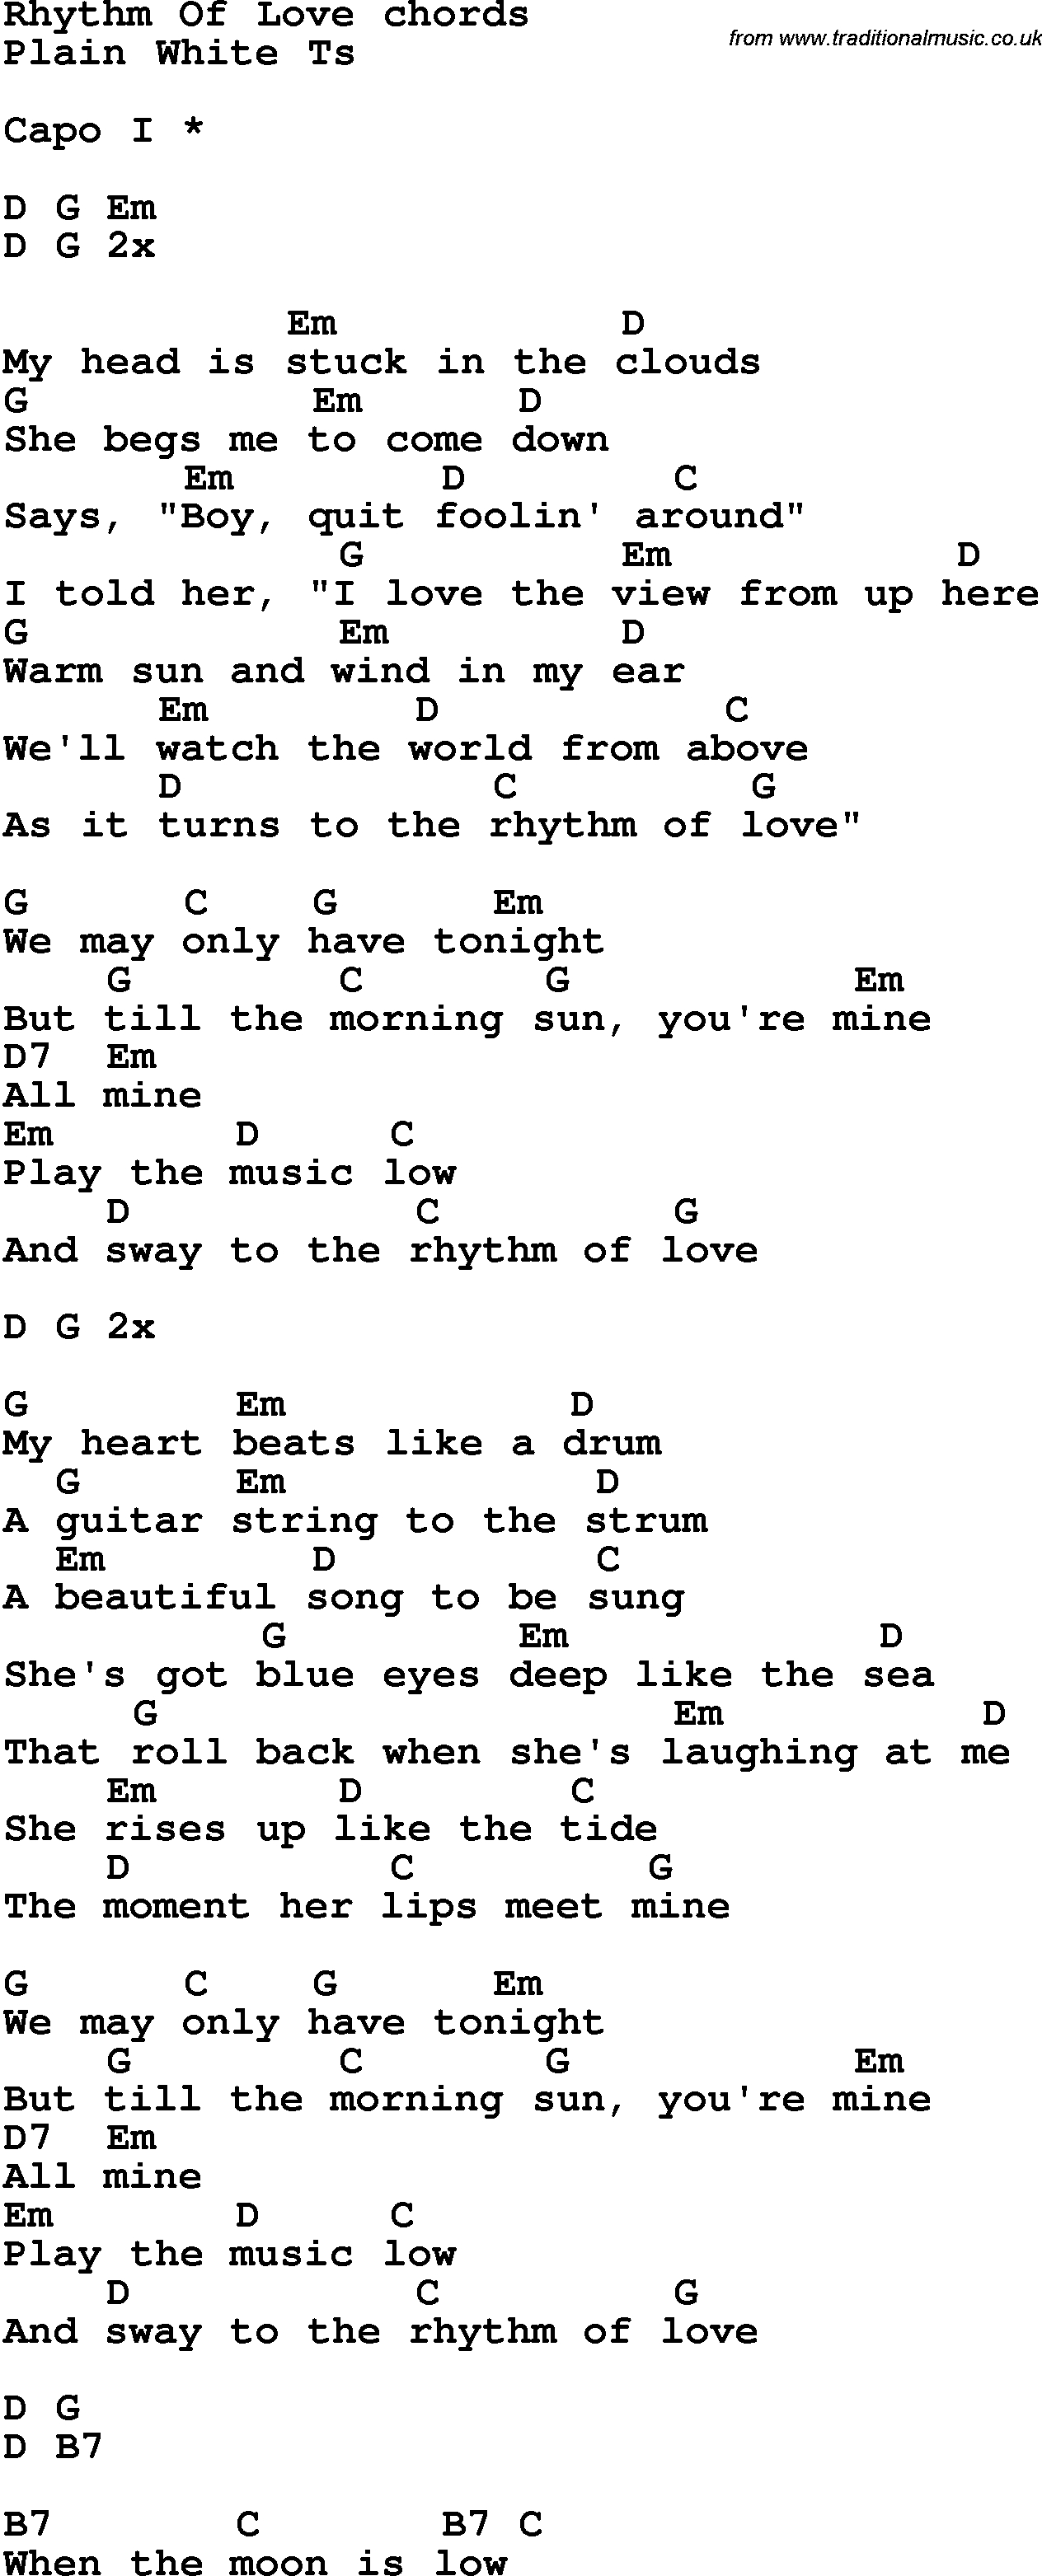 Sea Of Love Chords Song Lyrics With Guitar Chords For Rhythm Of Love